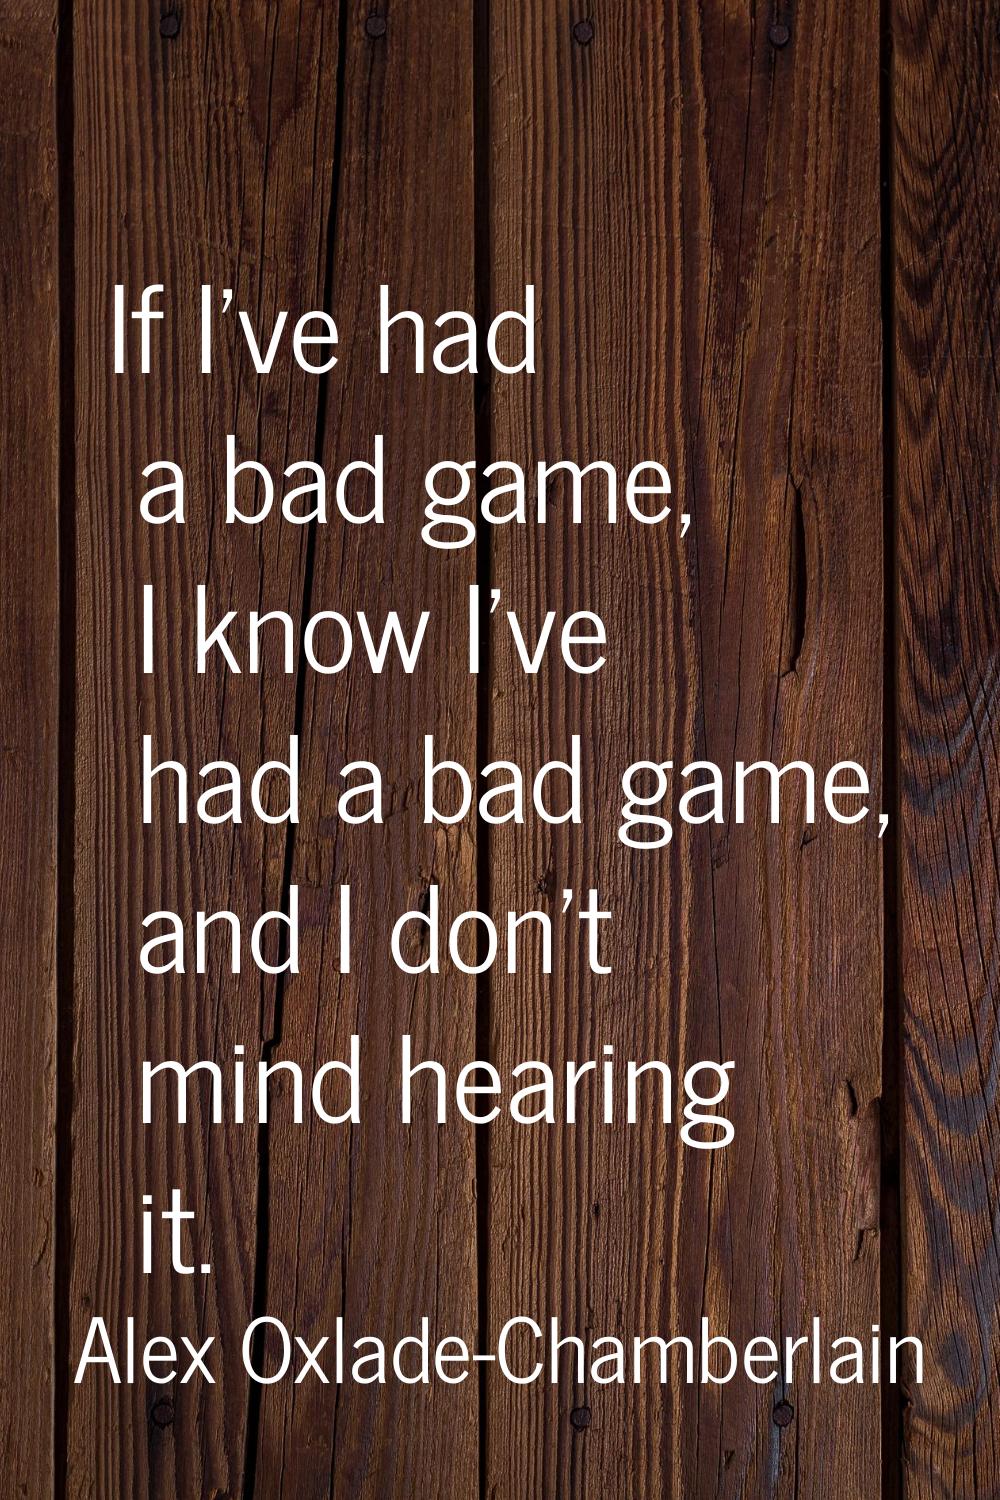 If I've had a bad game, I know I've had a bad game, and I don't mind hearing it.